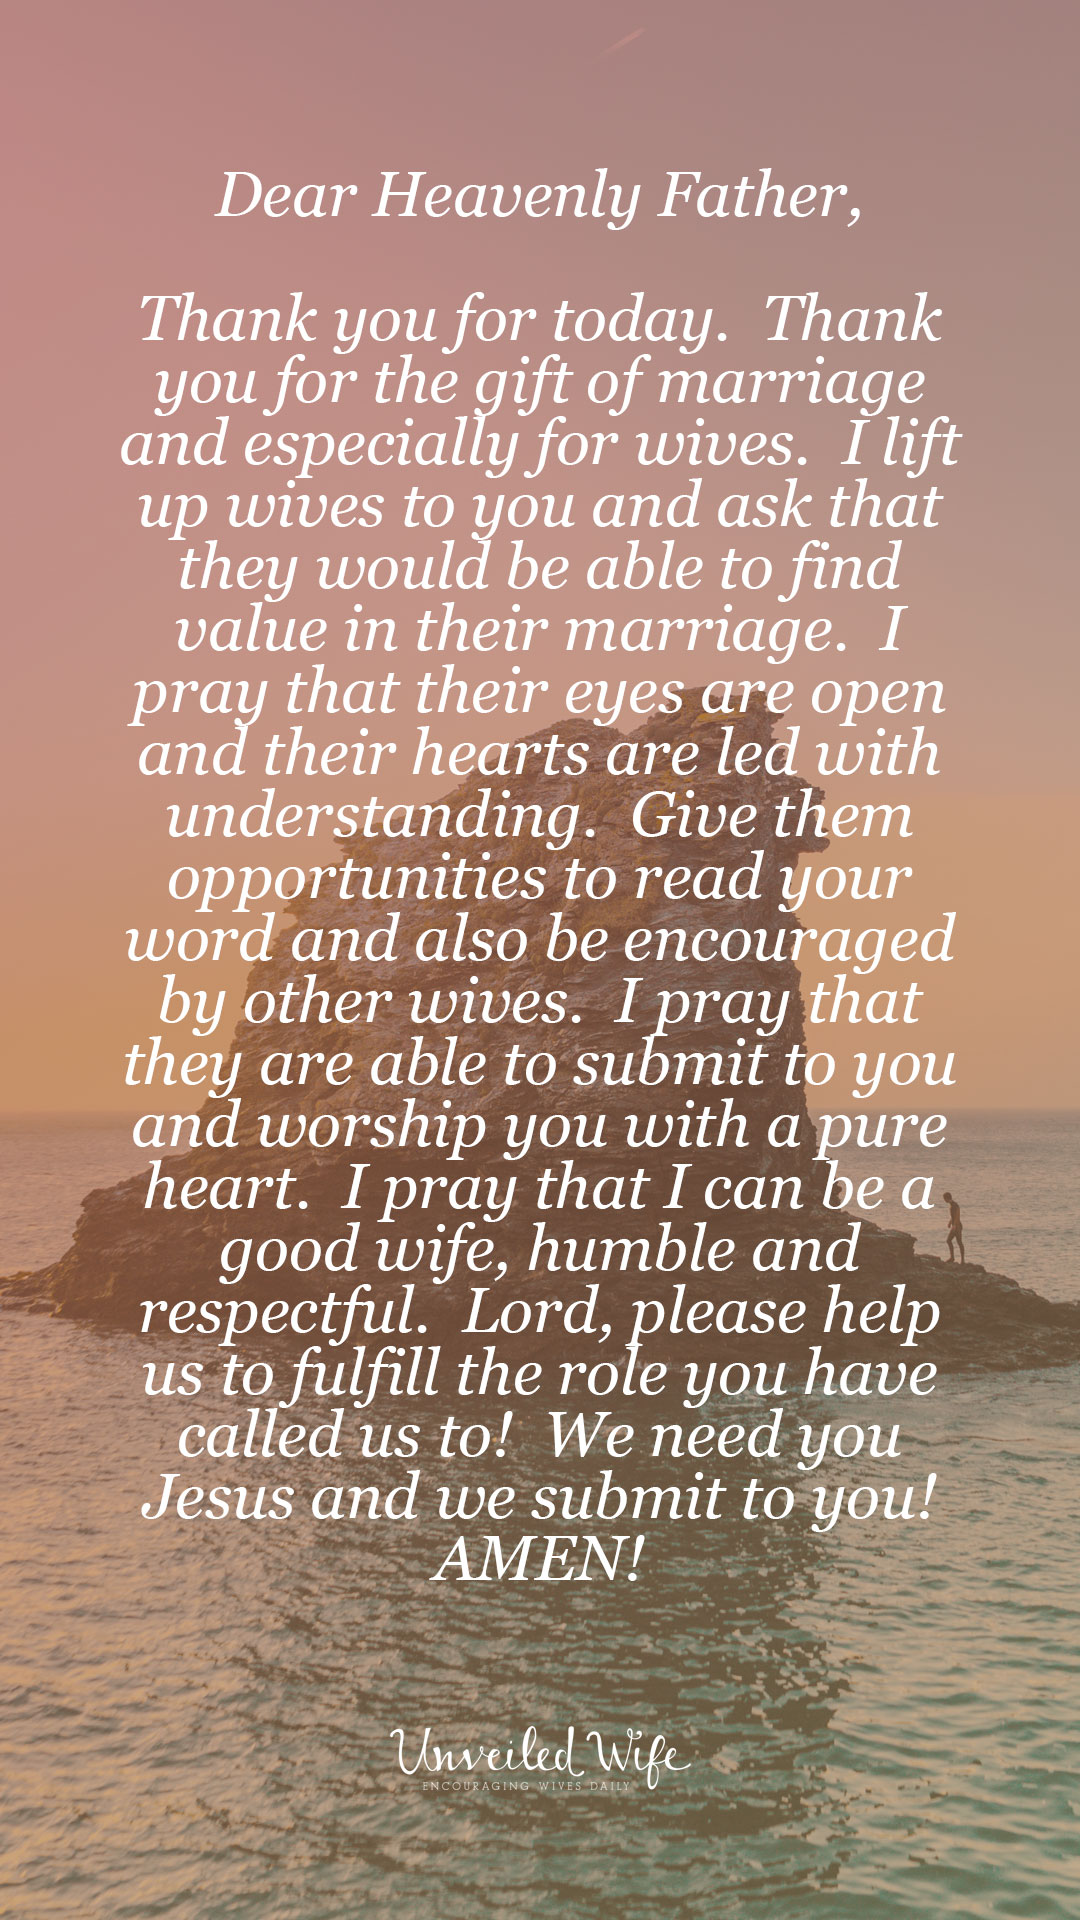 Prayer Of The Day : Wives Need Jesus